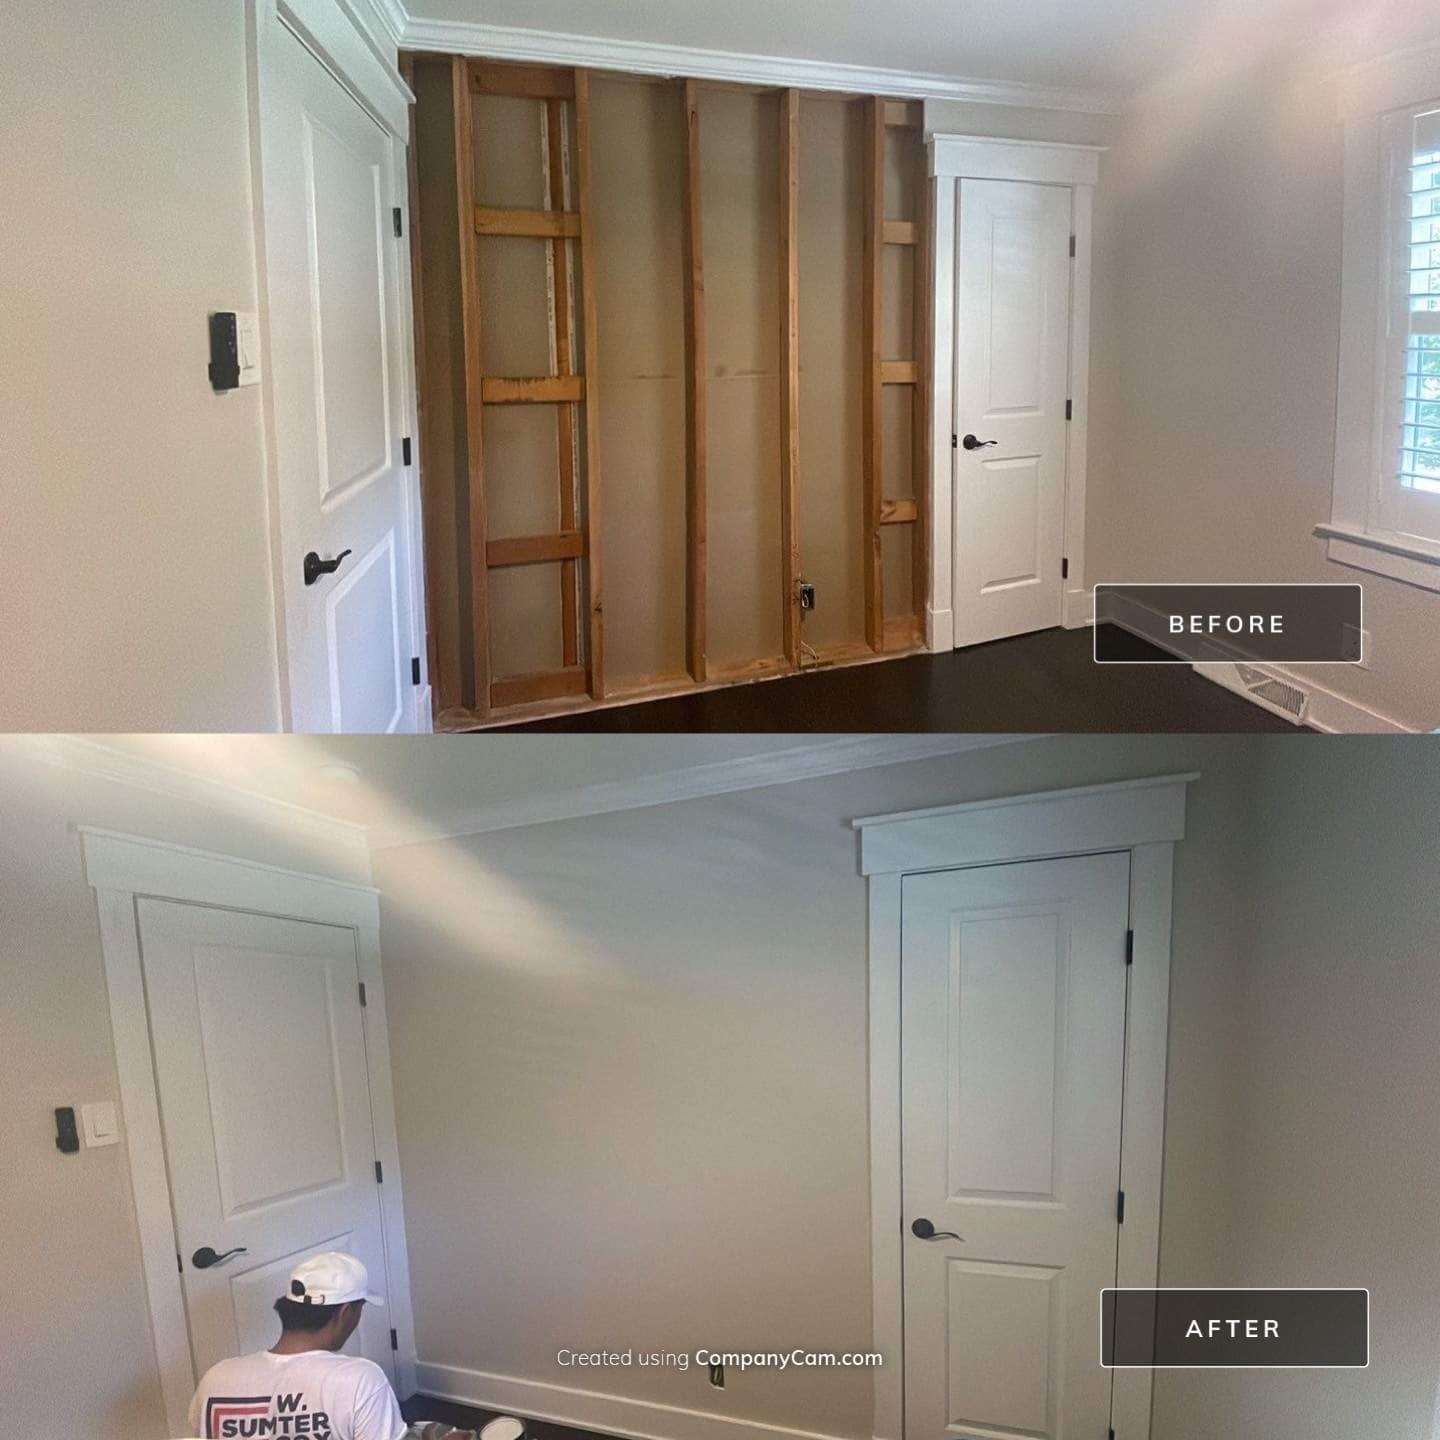 comparison picture of before and after painting services in charlotte nc